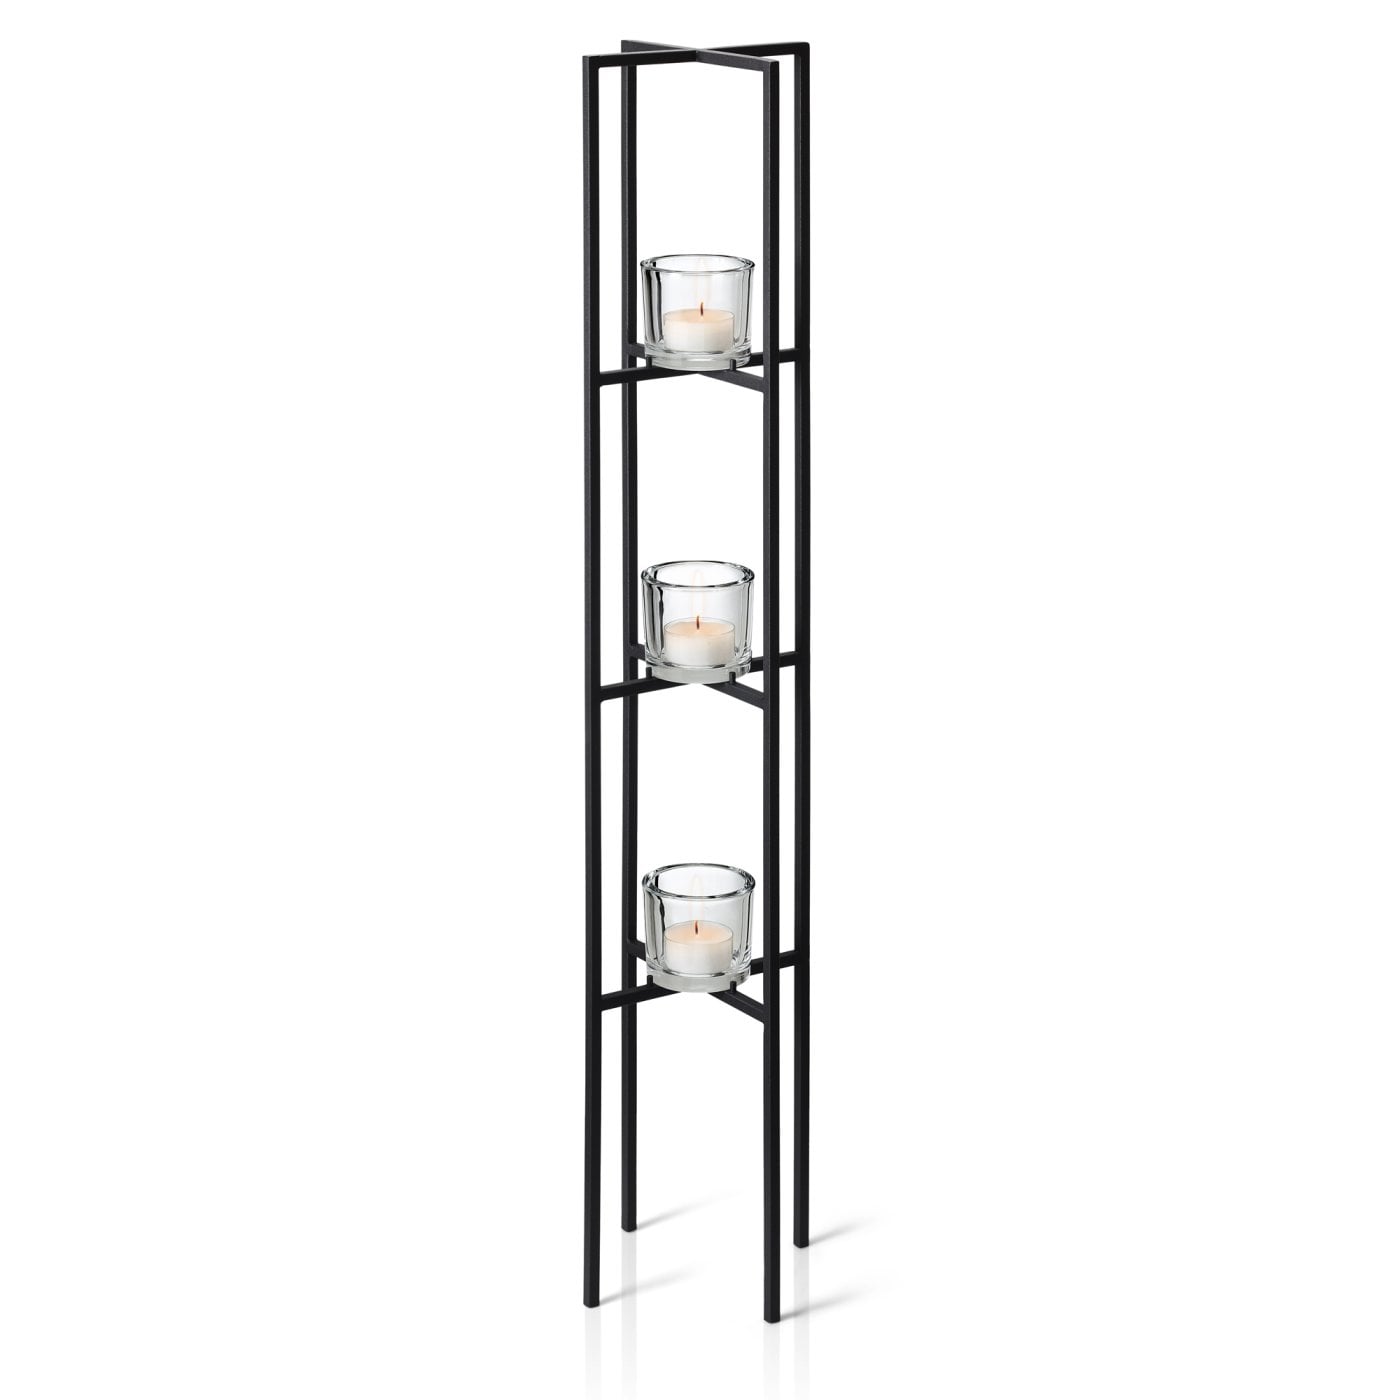 blomus-glass-candle-holder-on-3-tiered-black-steel-frame-nero-100cm